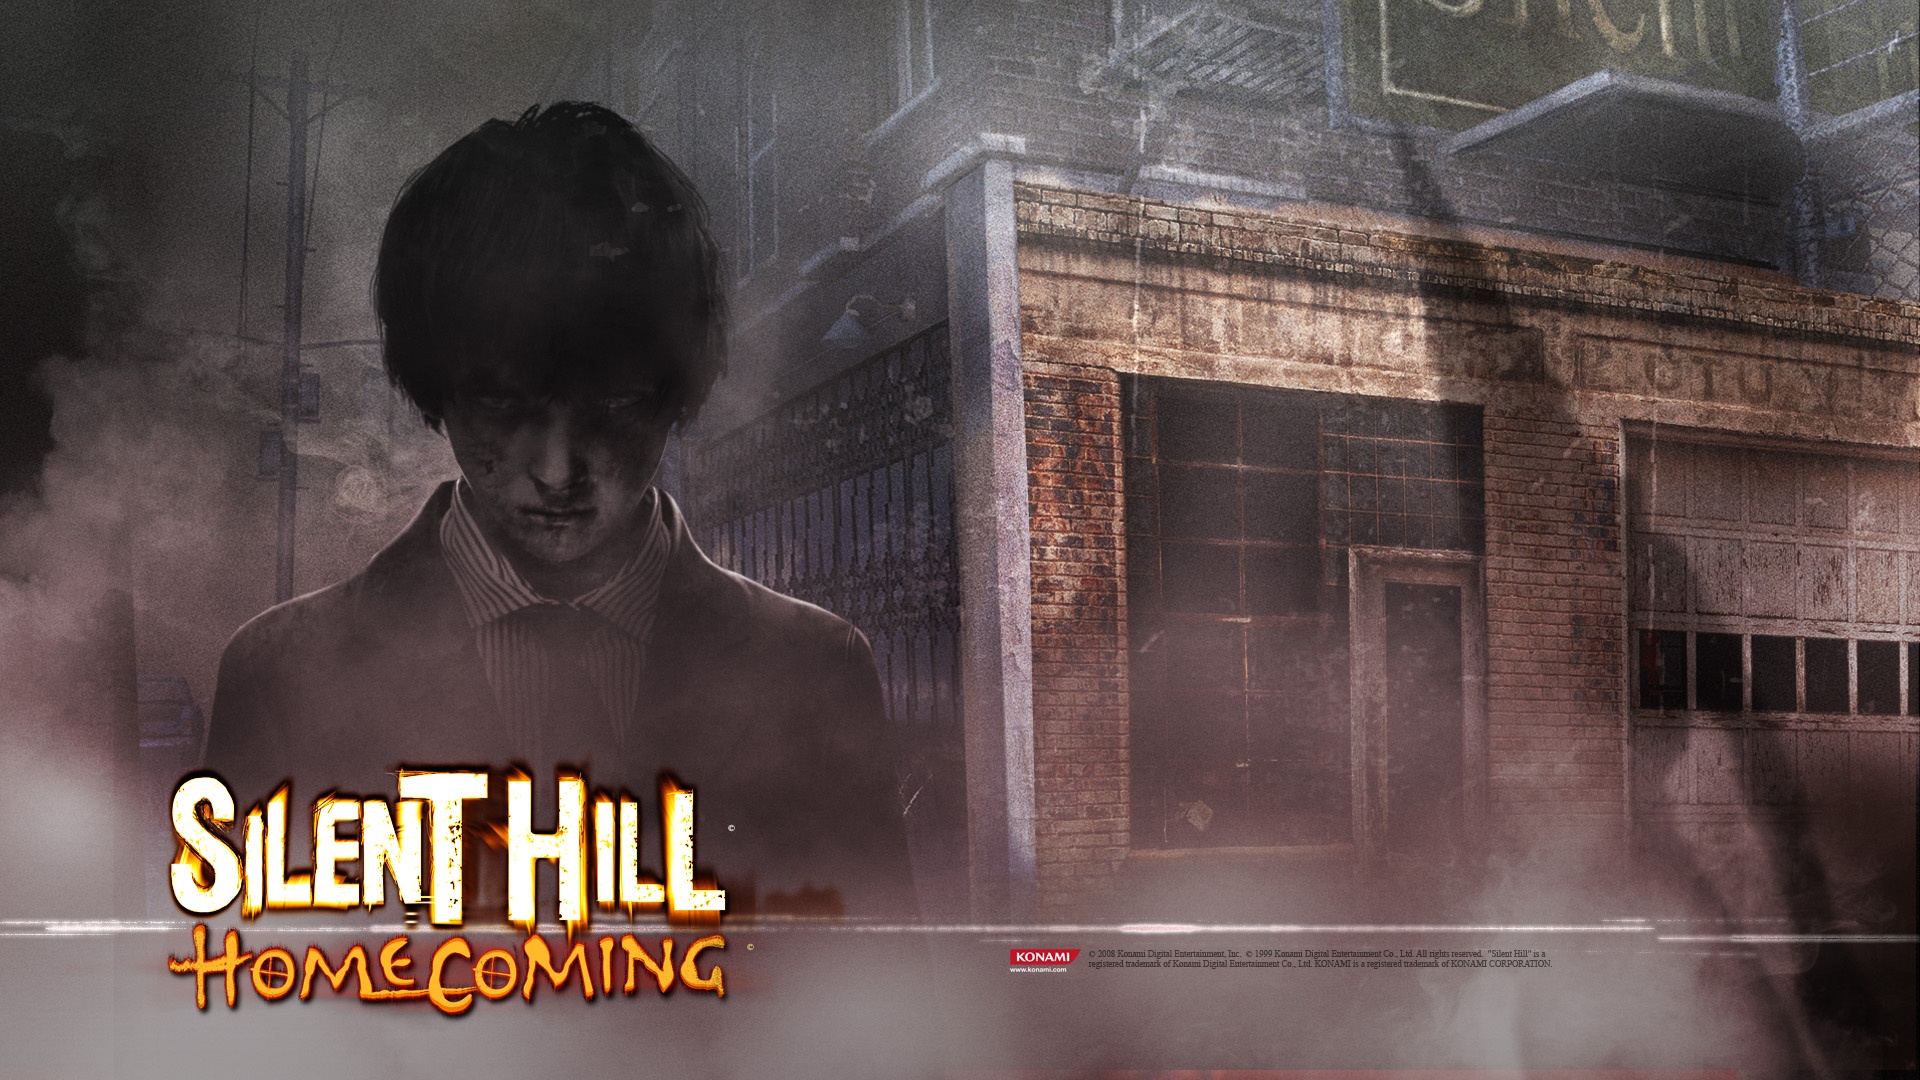 download silent hill 1 pc